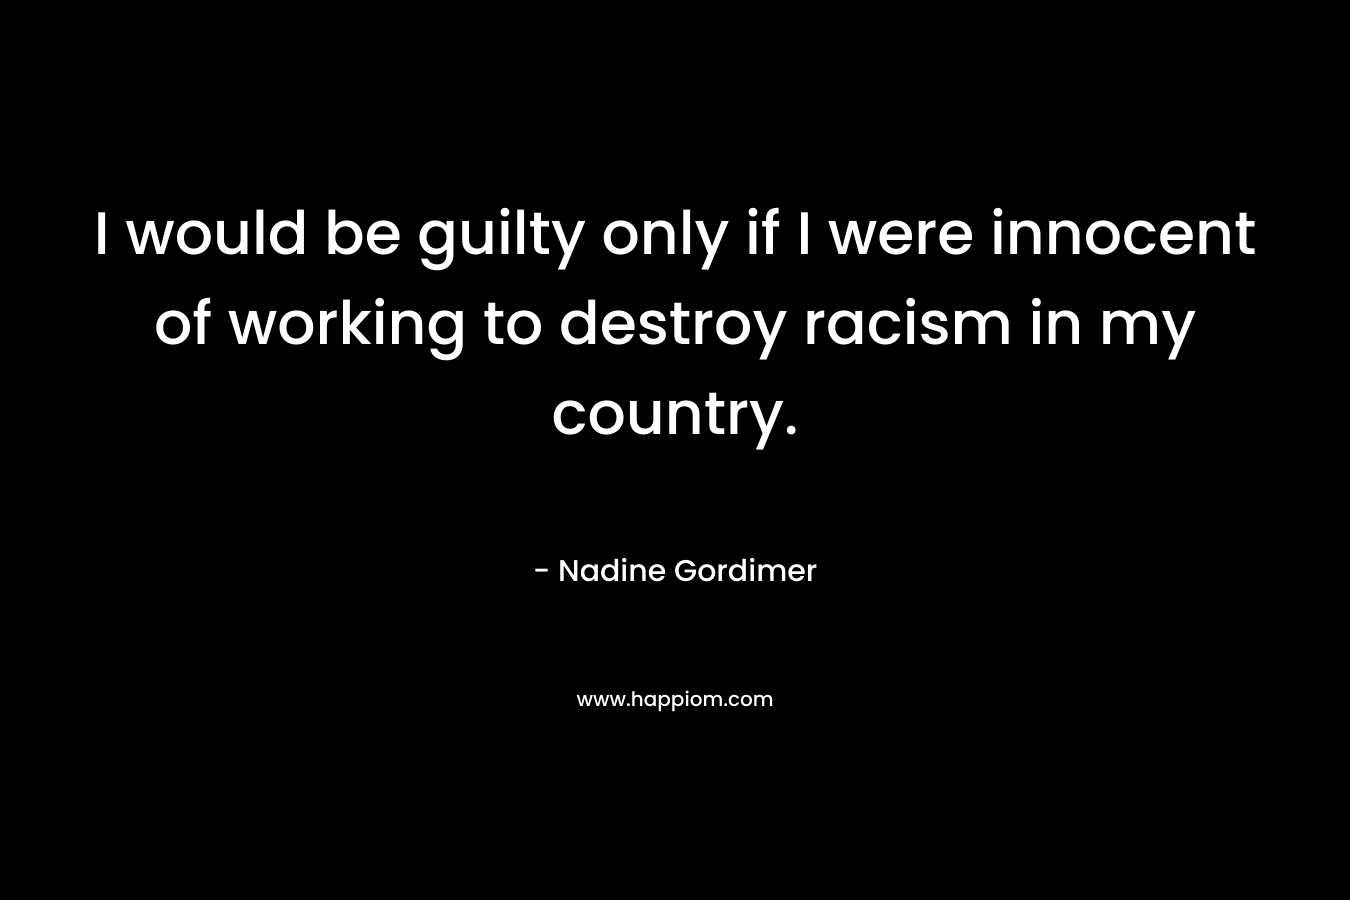 I would be guilty only if I were innocent of working to destroy racism in my country.